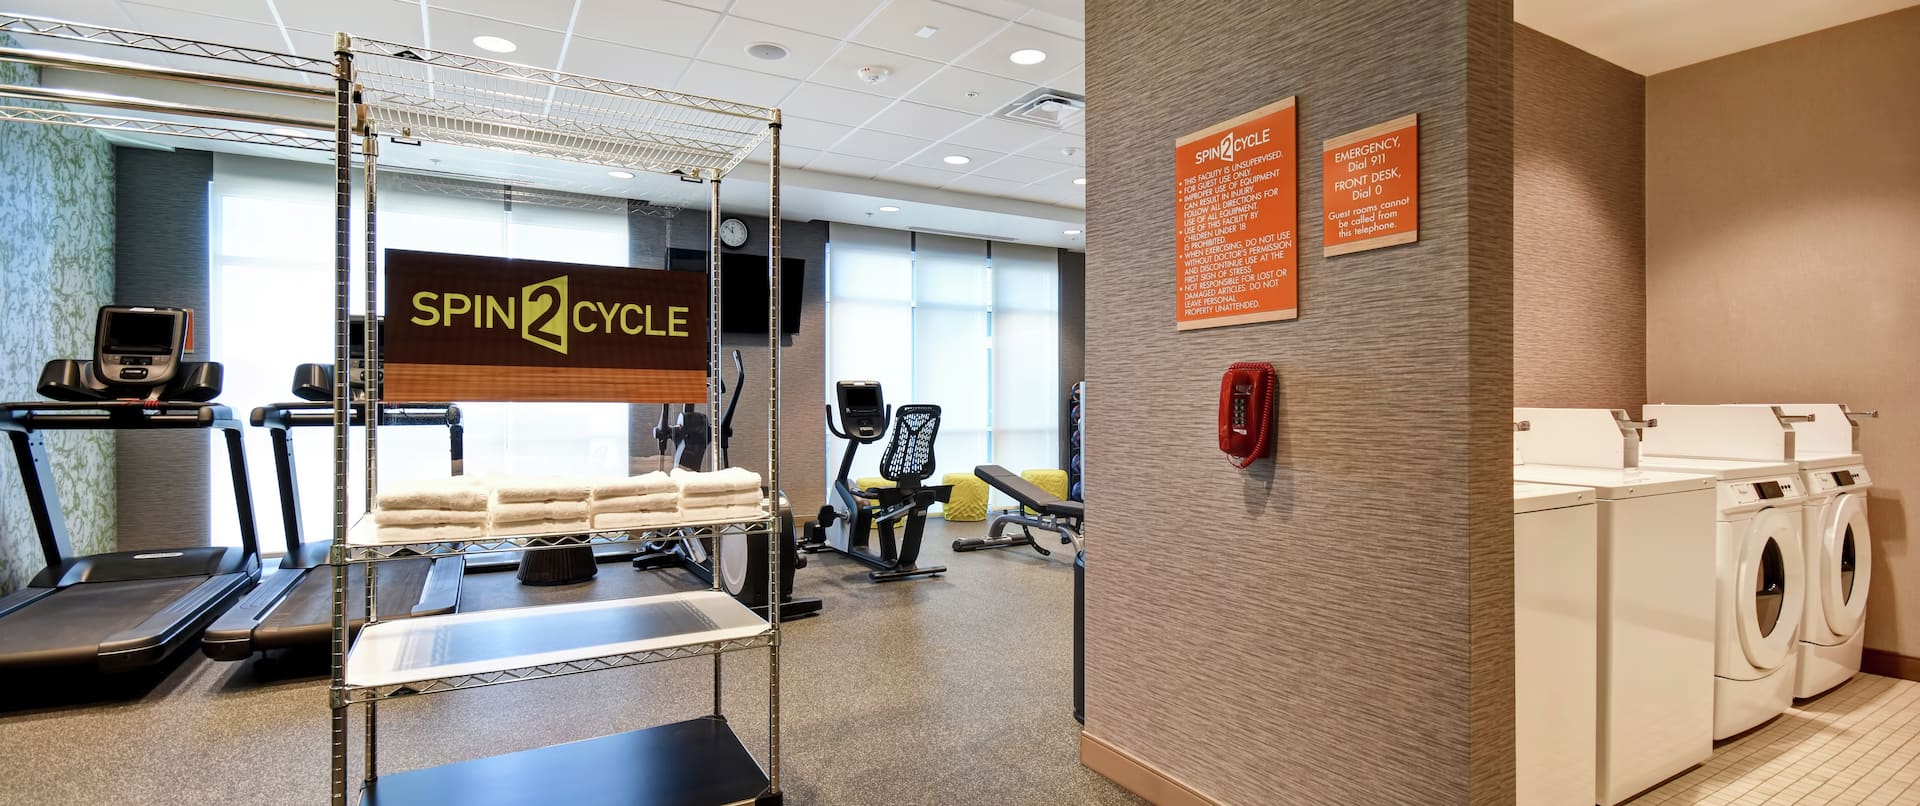 Spin2 Cycle Fitness Center and Laundry Room